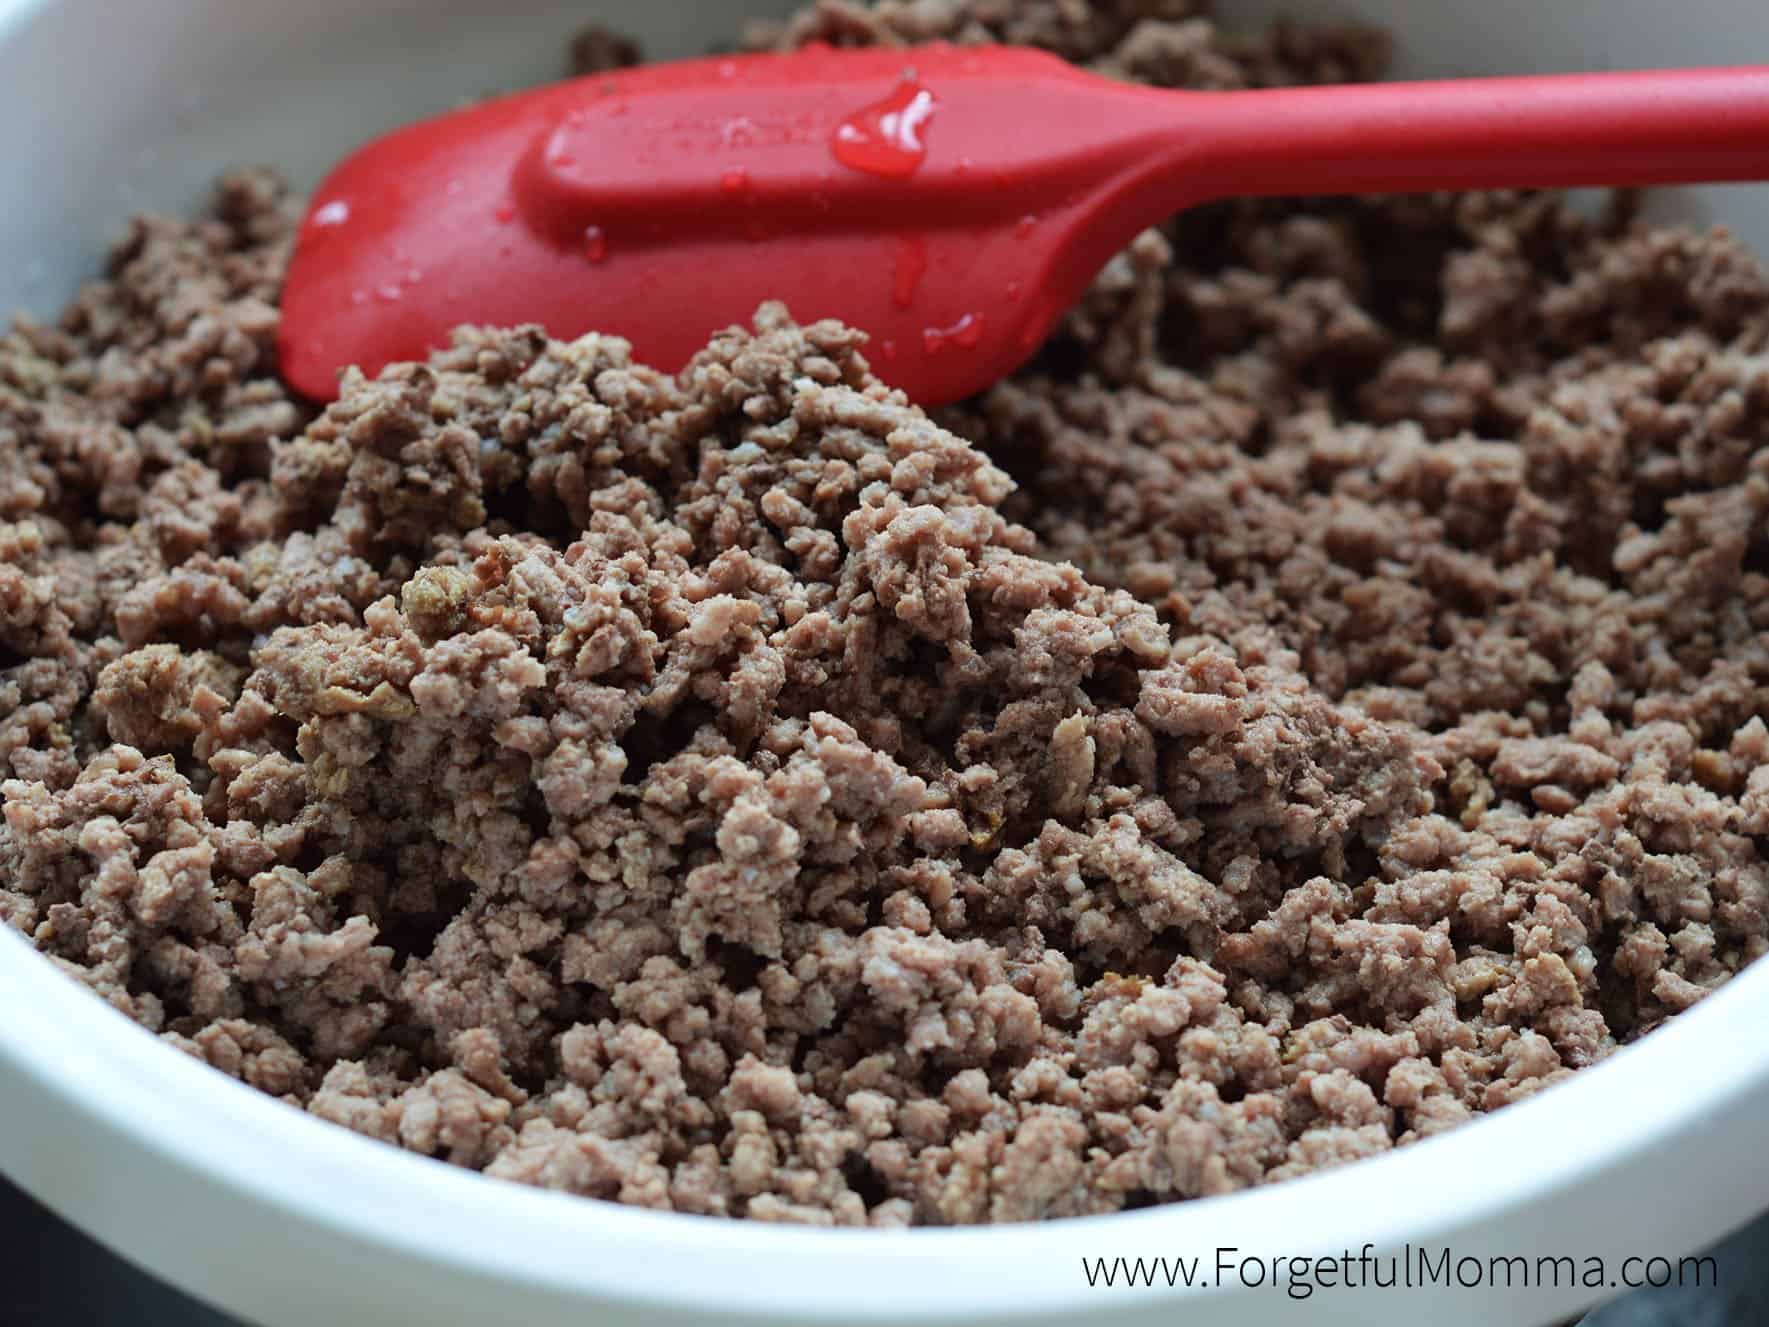 Browning Ground Beef in Your Slow Cooker - Forgetful Momma